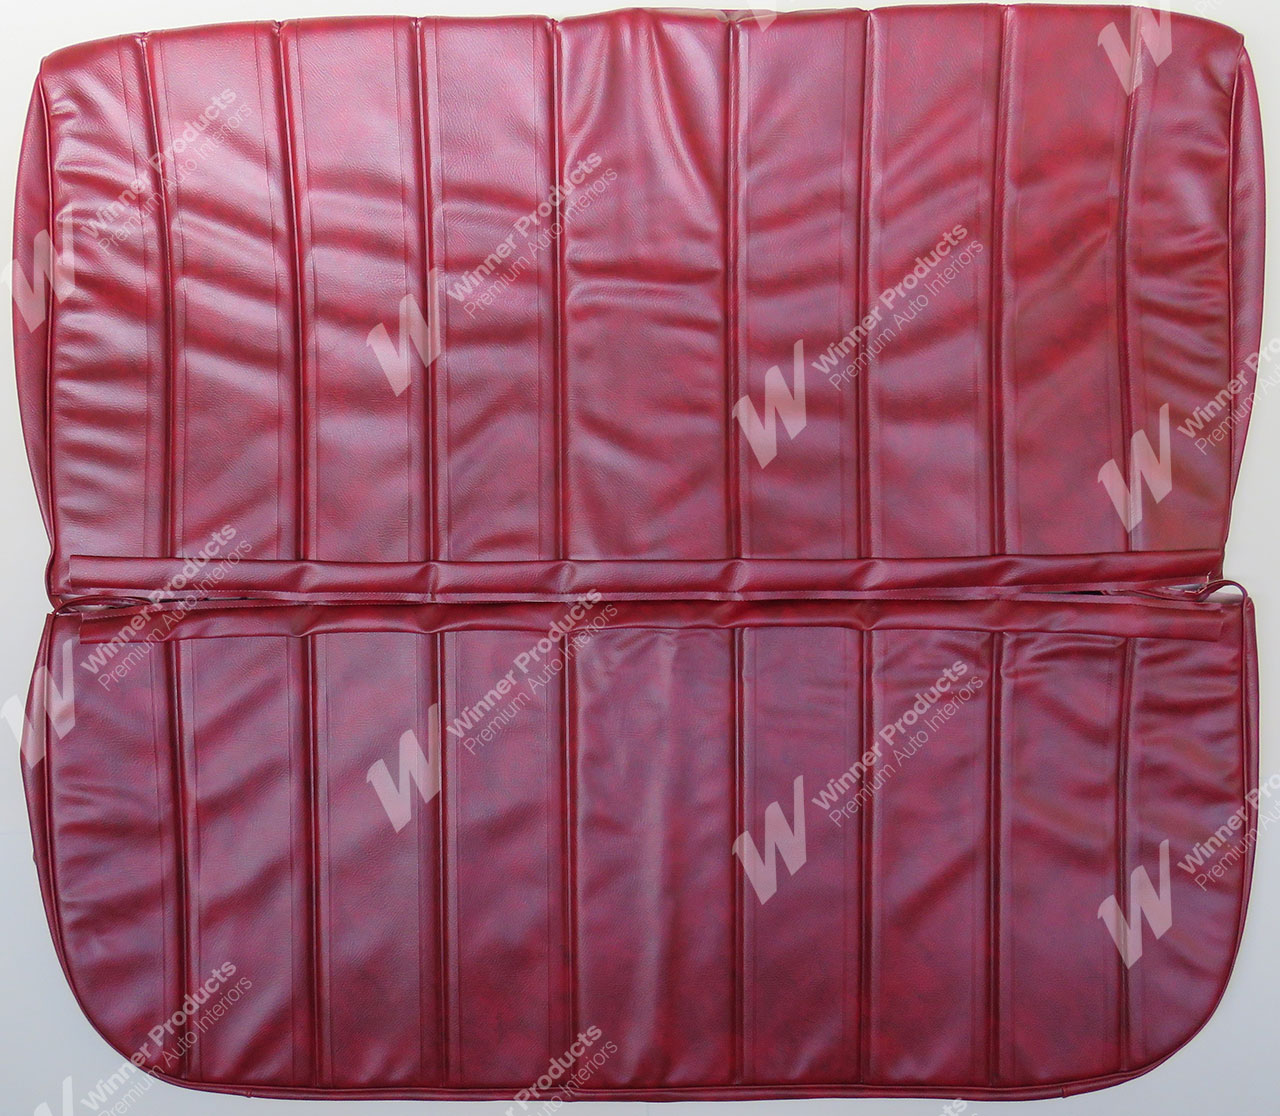 Holden Kingswood HG Kingswood Ute 12E Baroque Red Seat Covers (Image 1 of 4)